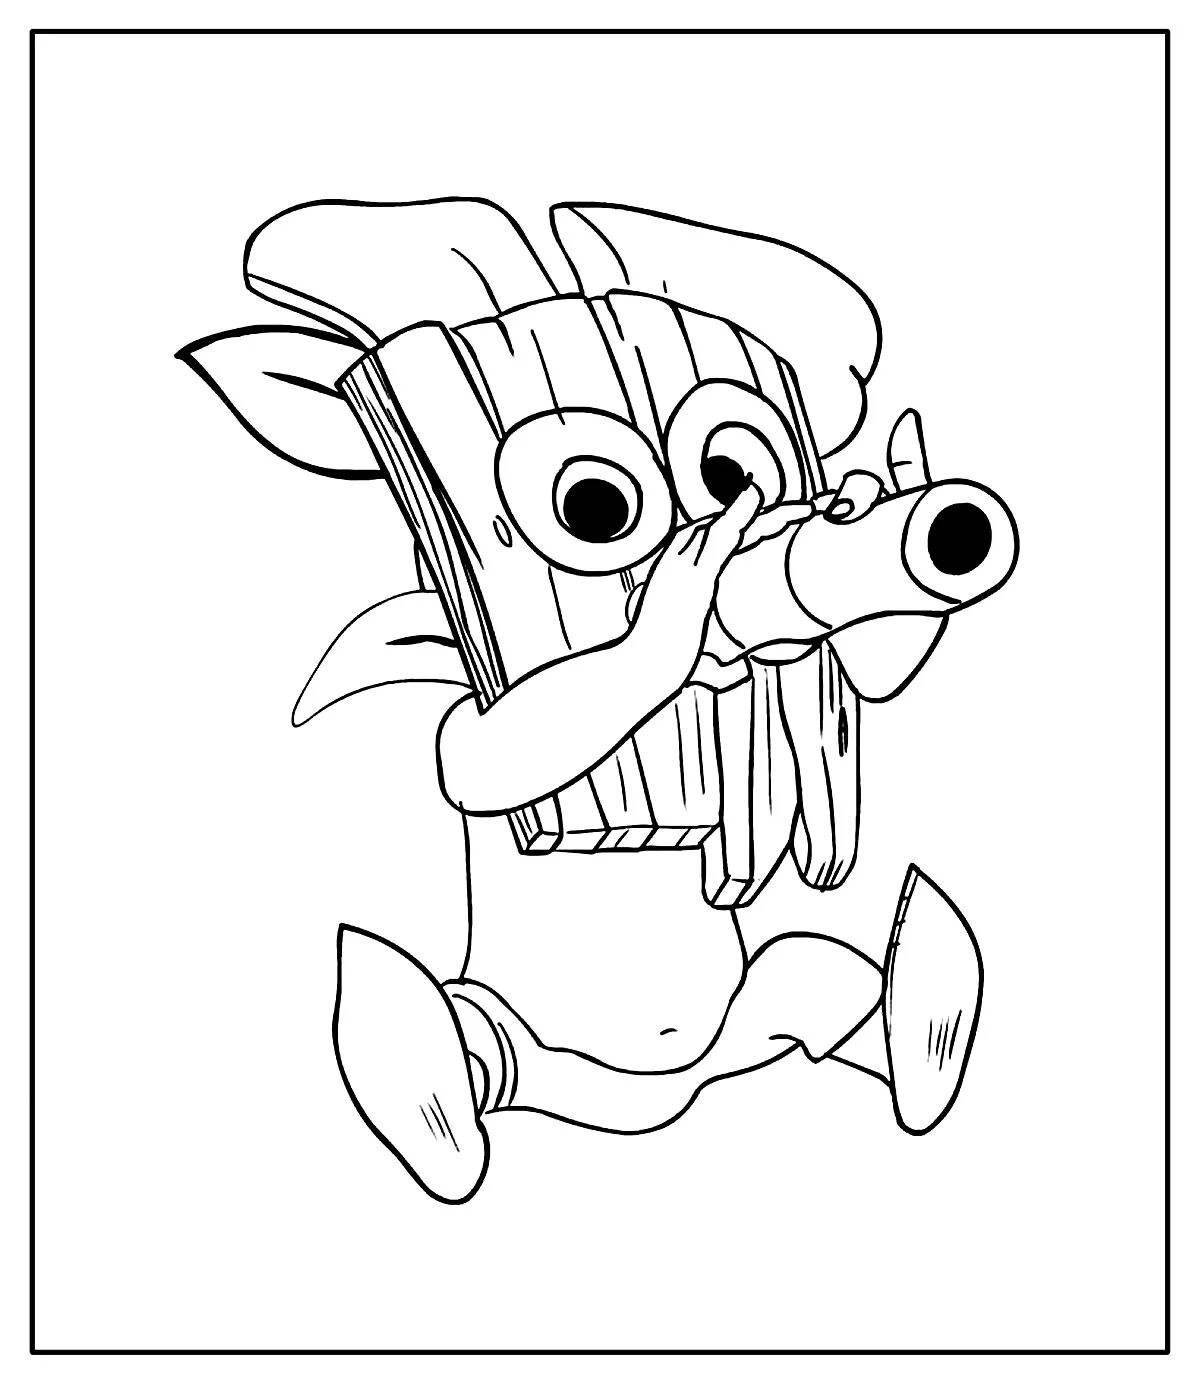 Clash royale arena live coloring page